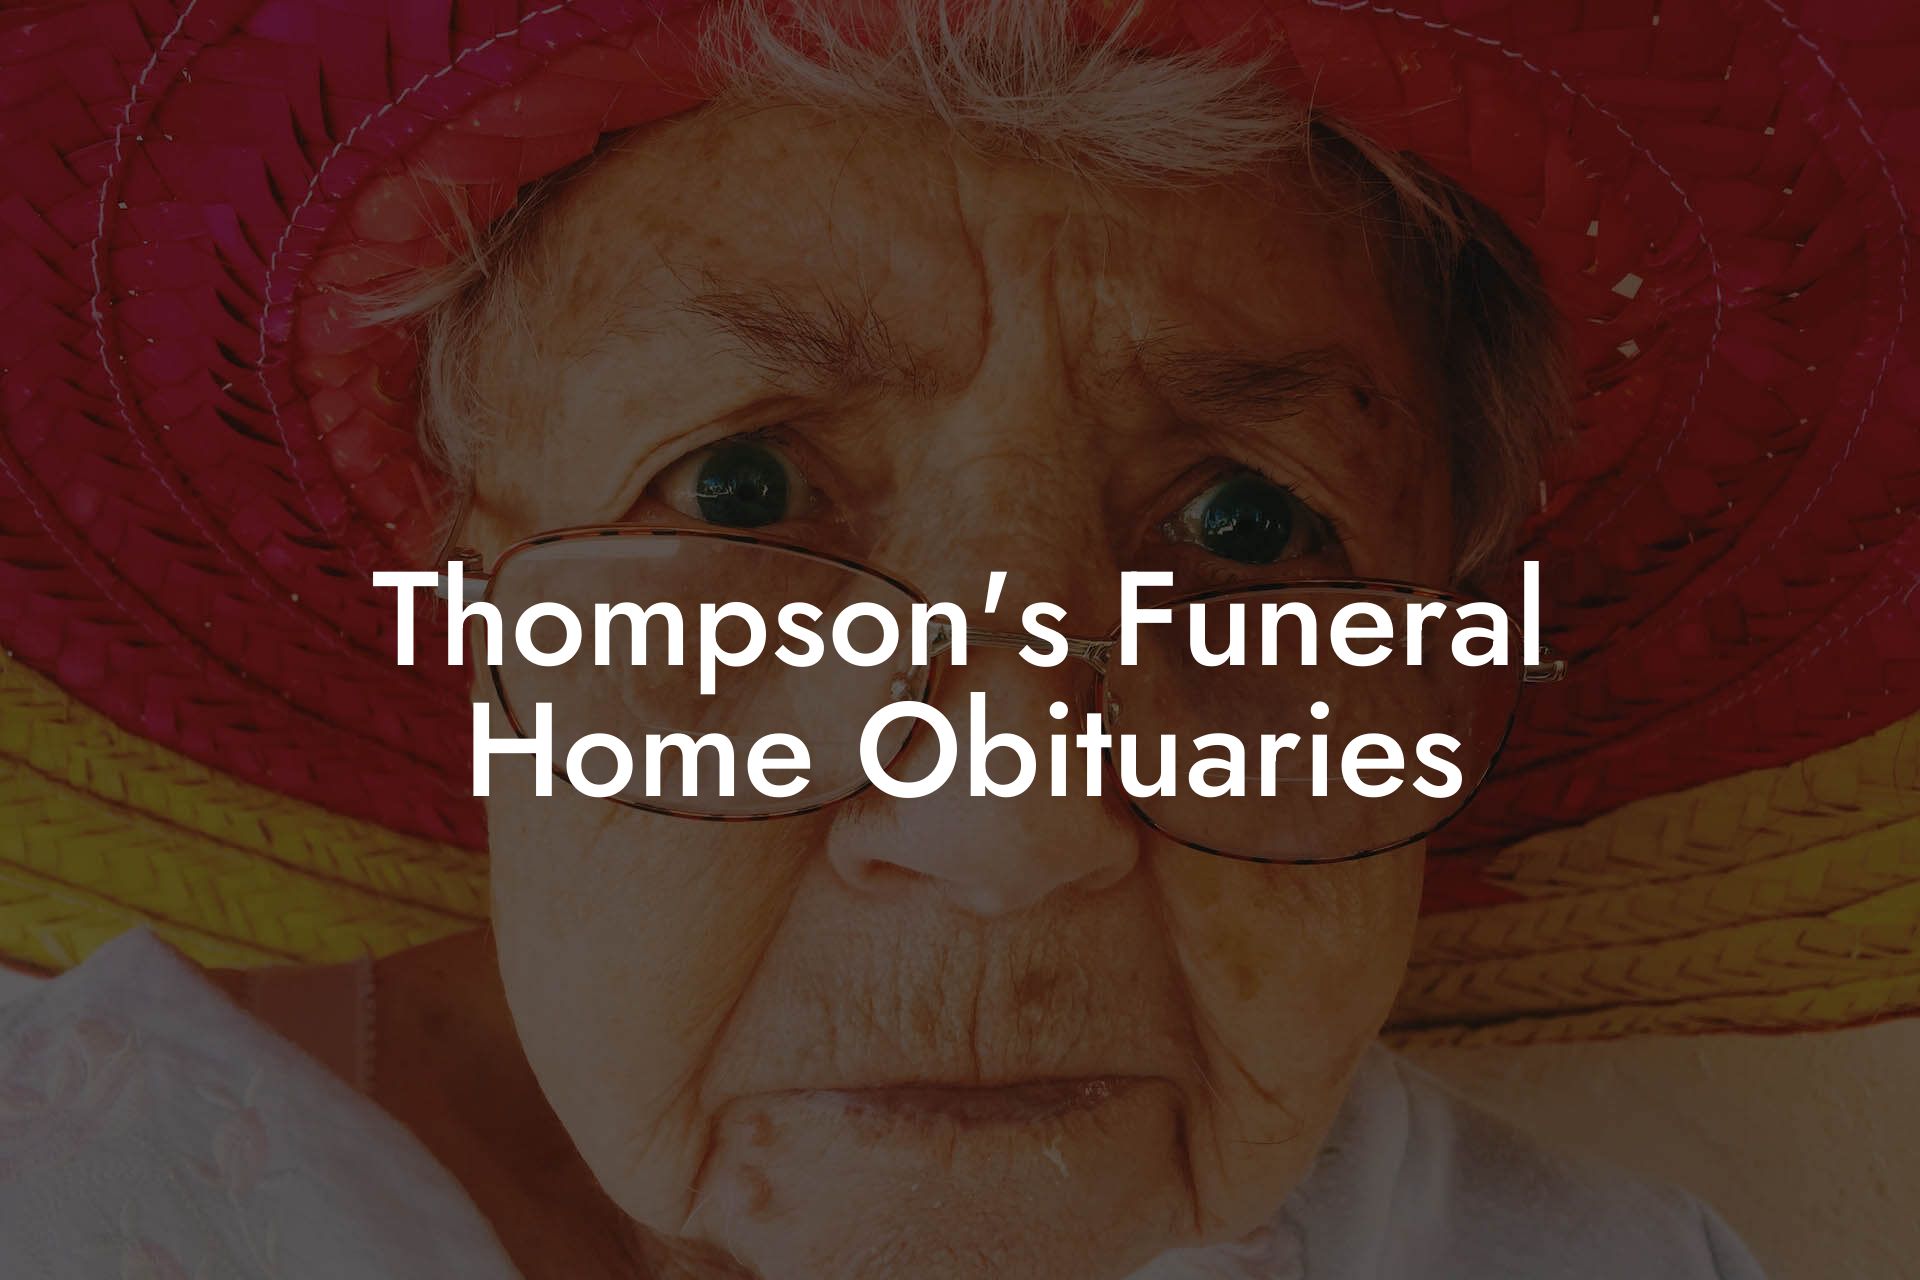 Thompson's Funeral Home Obituaries